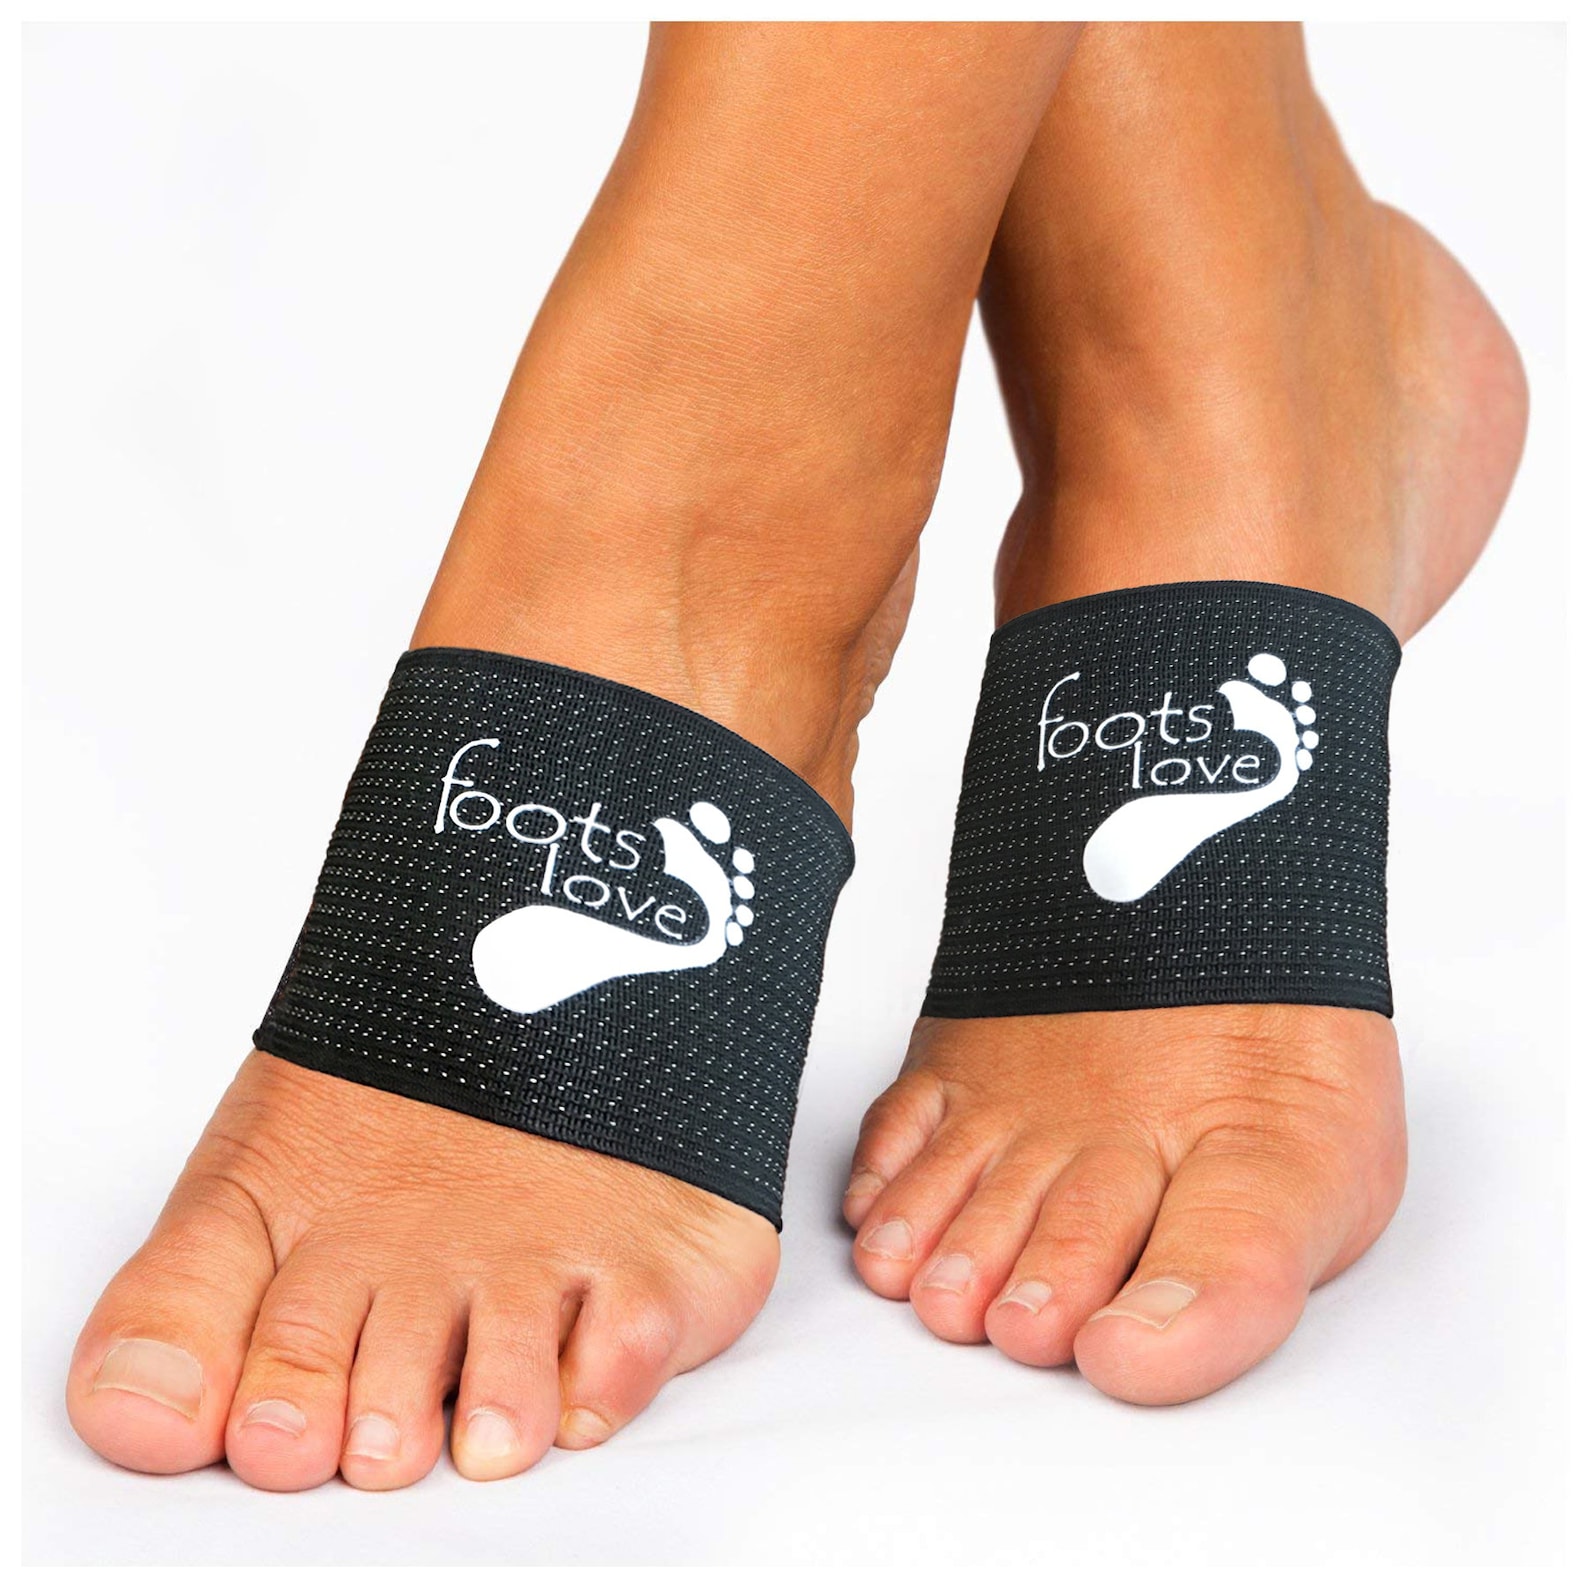 Foots Love. Plantar Fasciitis Arch Support Compression - Etsy